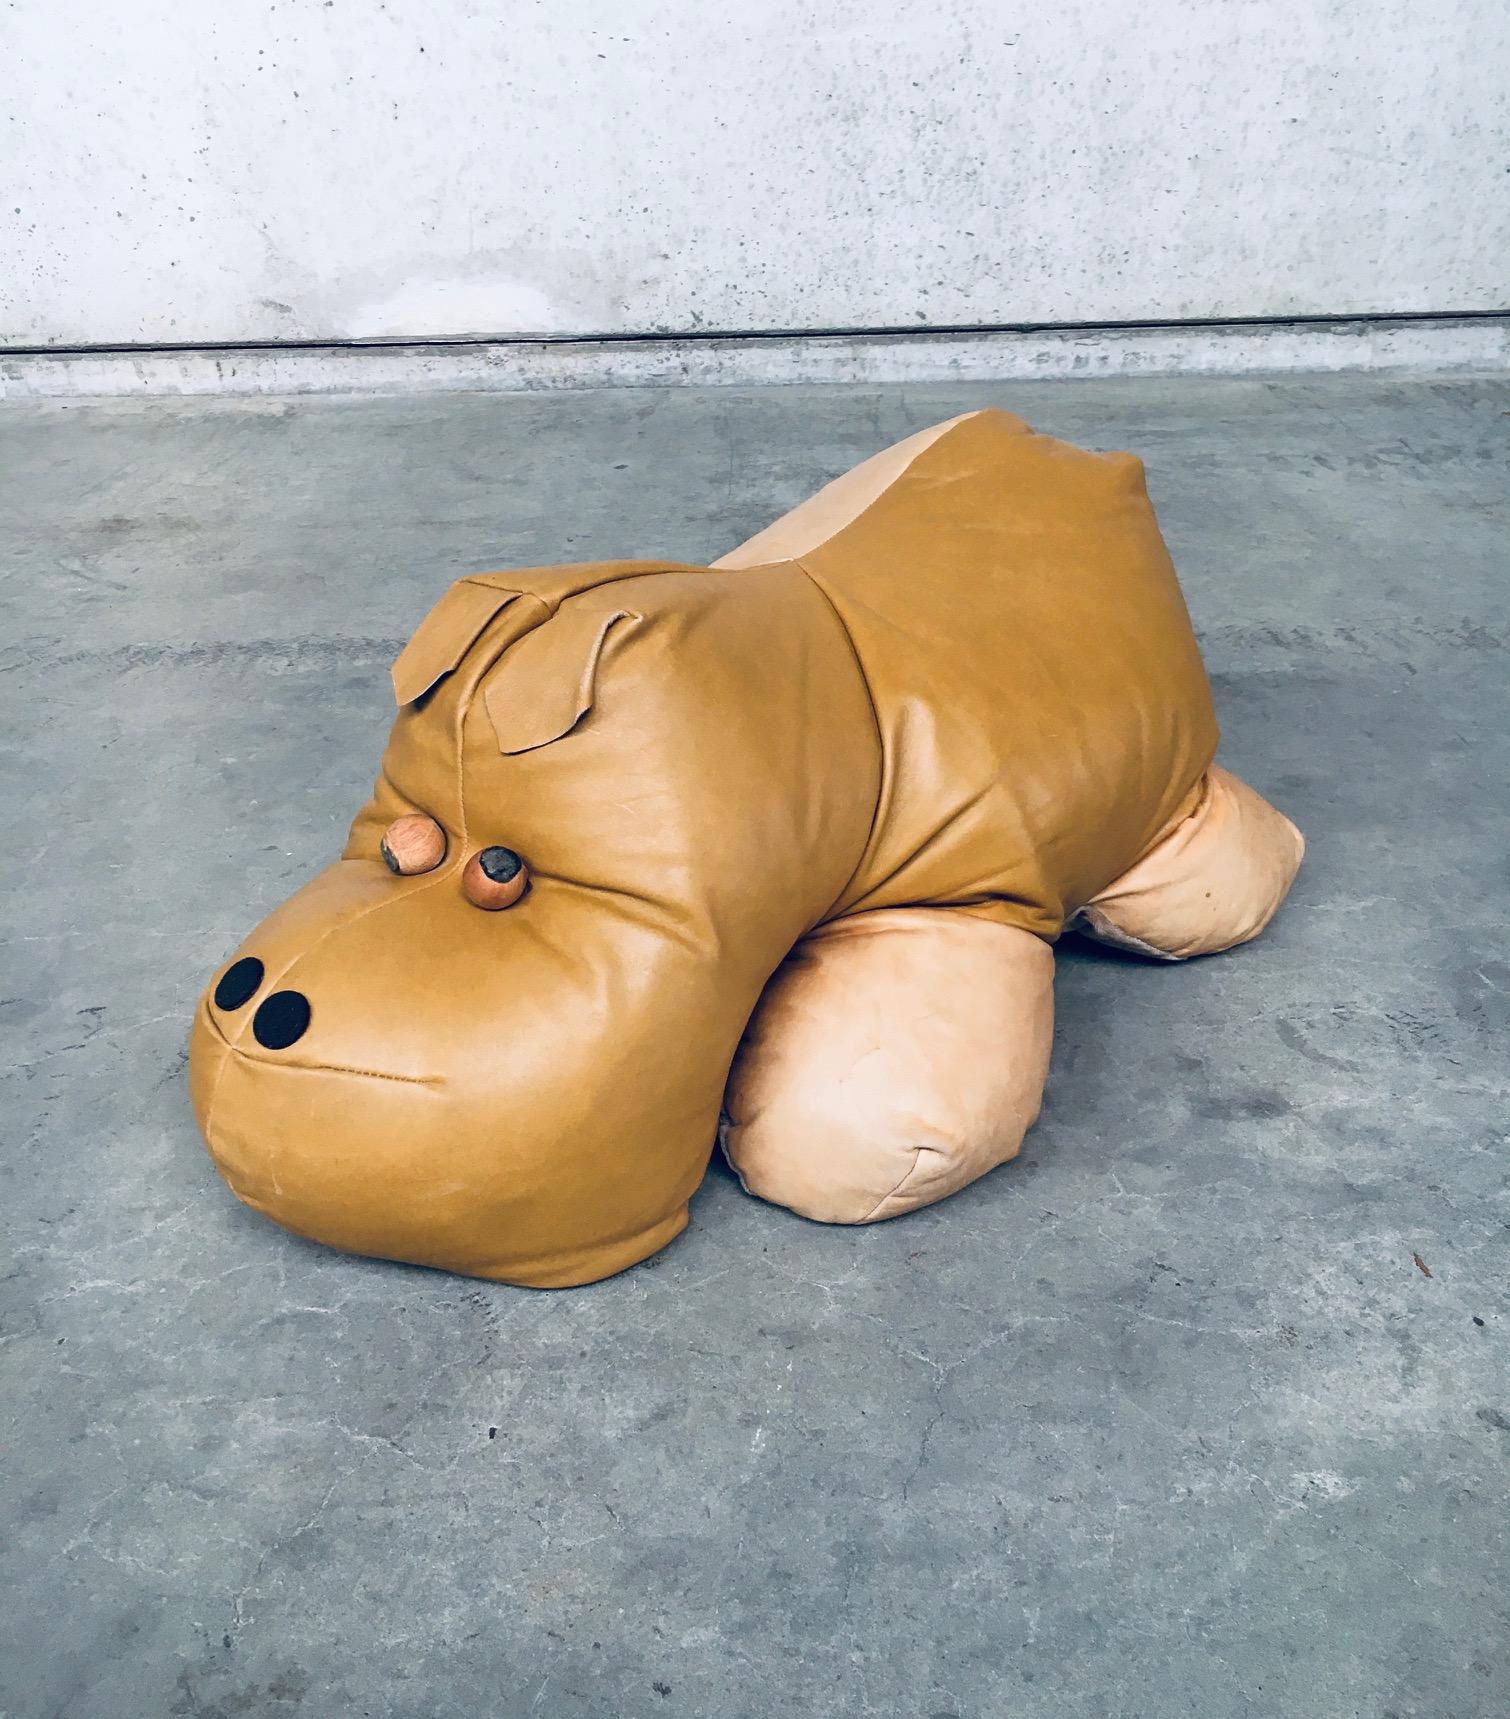 Vintage Leather Hippo Hippopotamus Footstool Pouf. Made in the 1970's, probably Italy. Two tone leather large pouf or foorstool with soft fabric on the underside and pair of wooden ball eyes. There's a patch repair on the underside of the hippo and